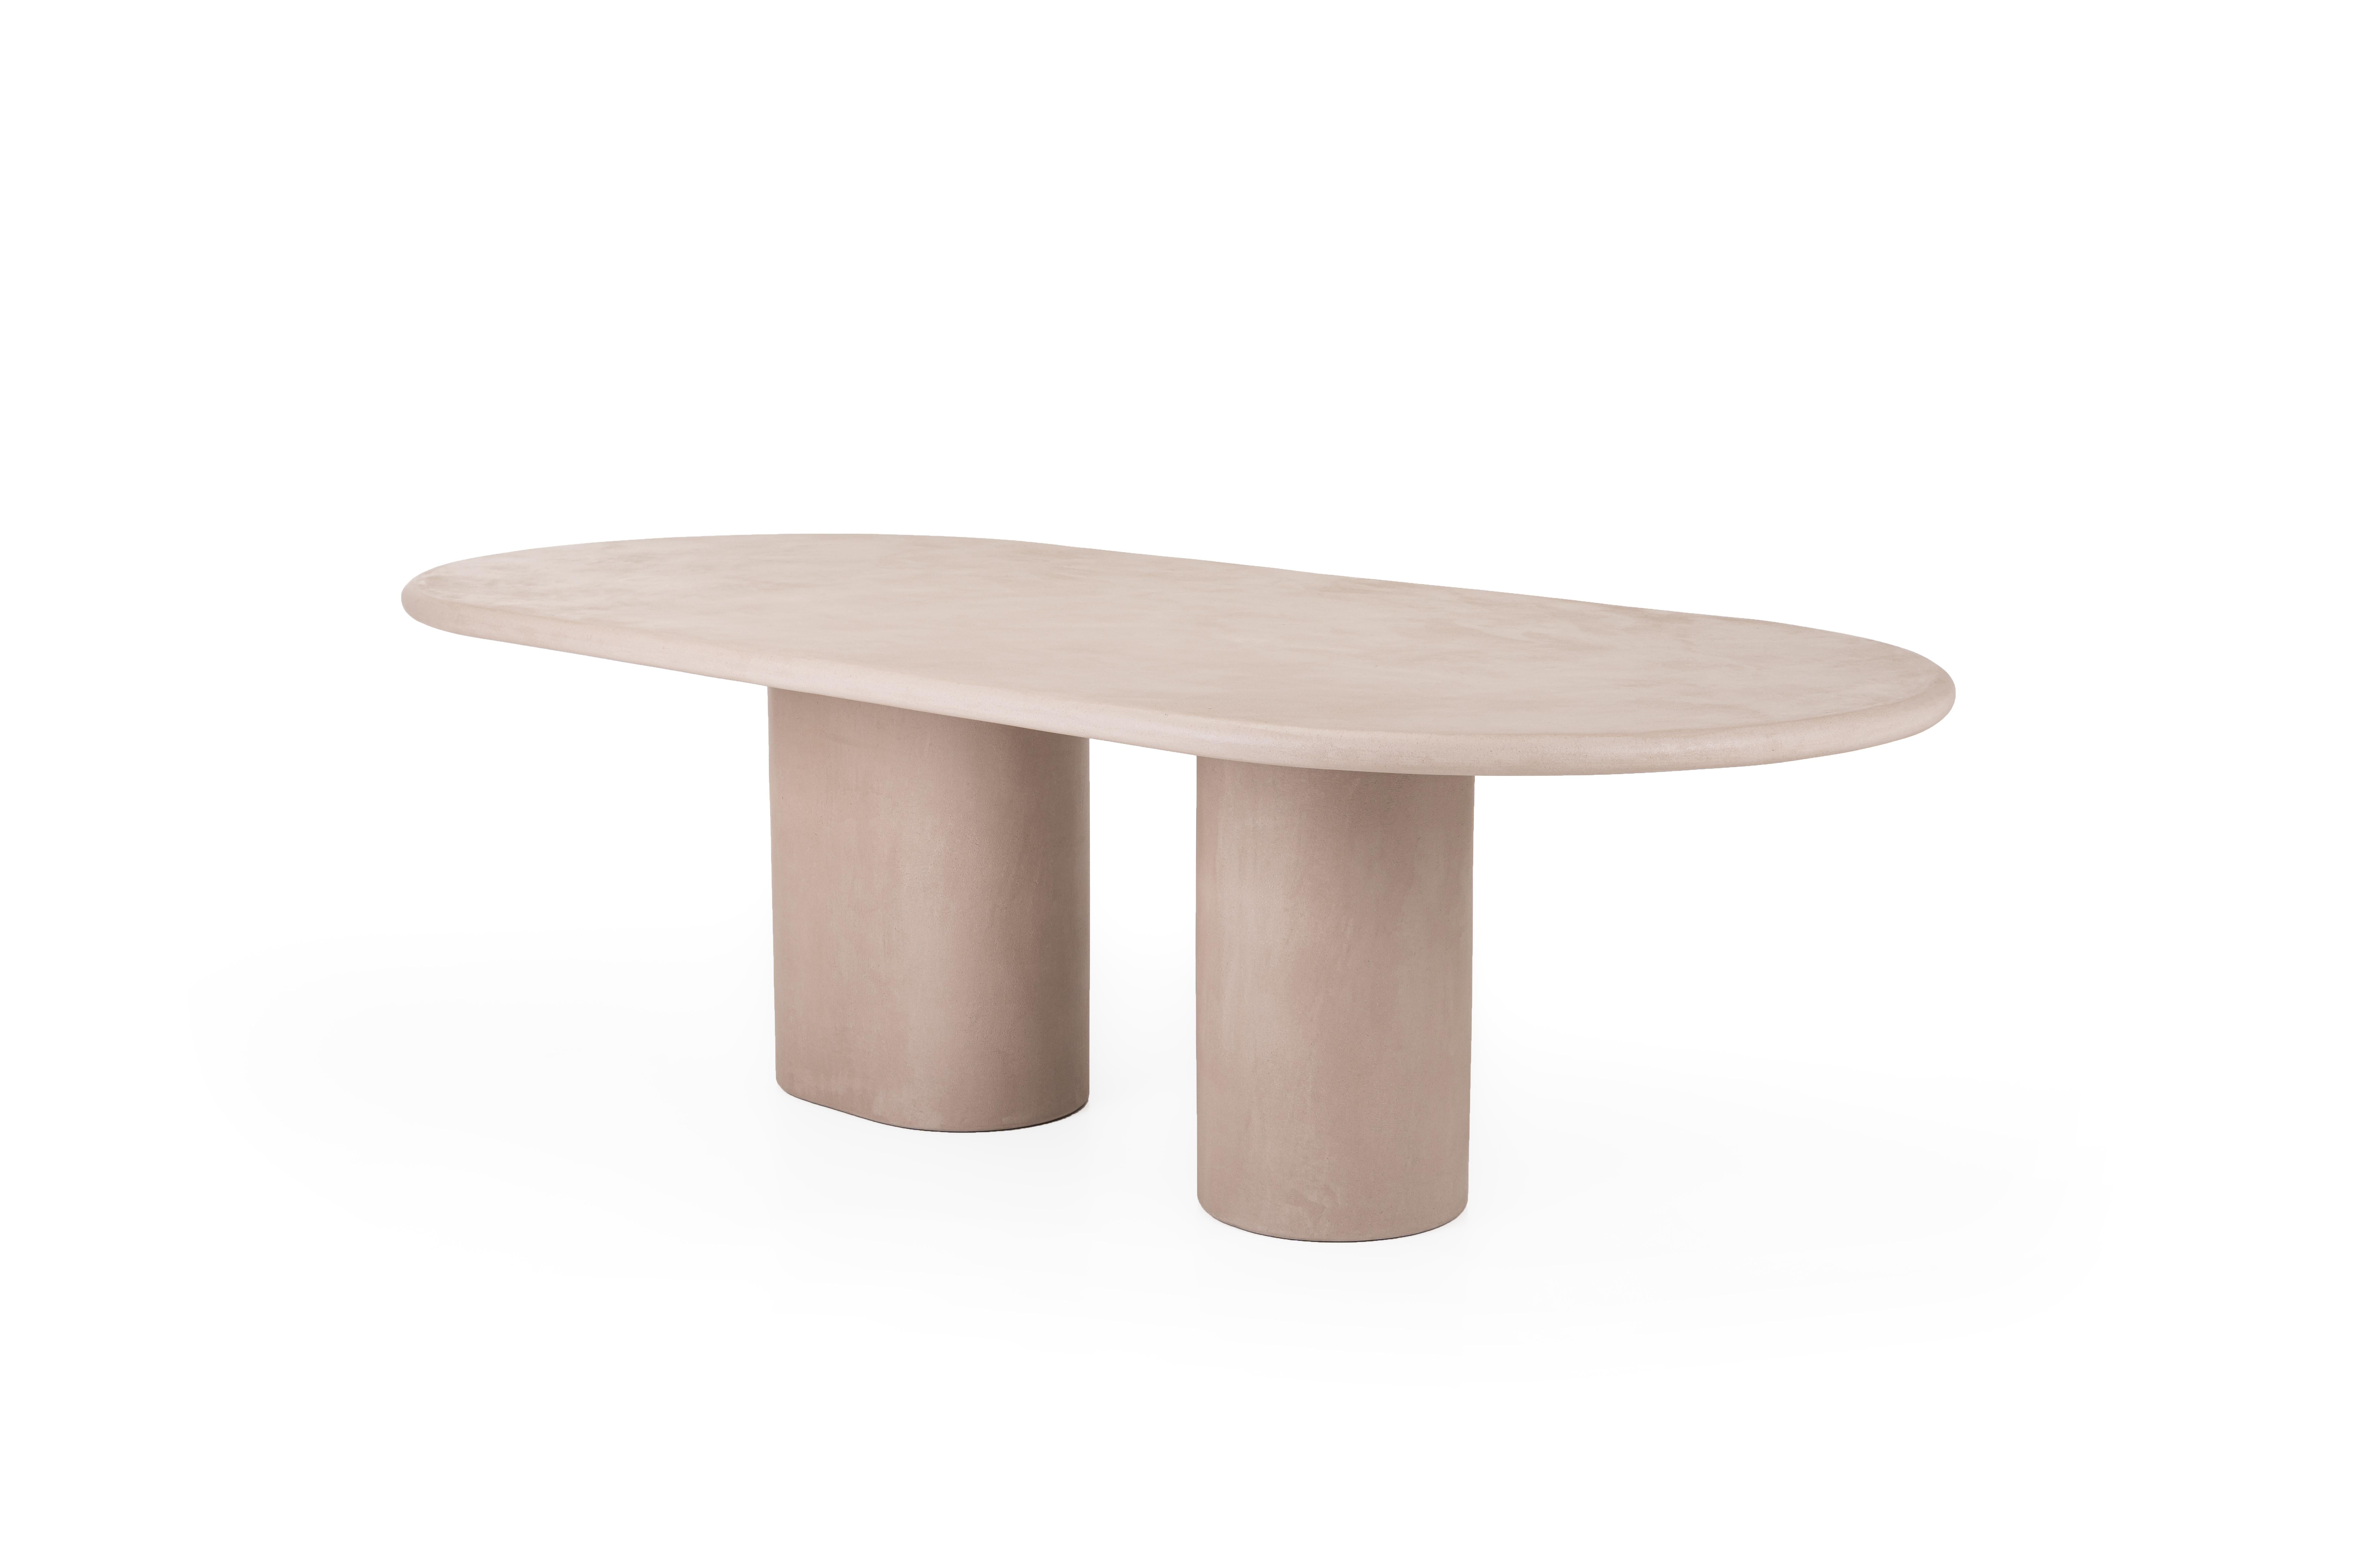 Natural Plaster Dining Table "Column" 320 by Isabelle Beaumont